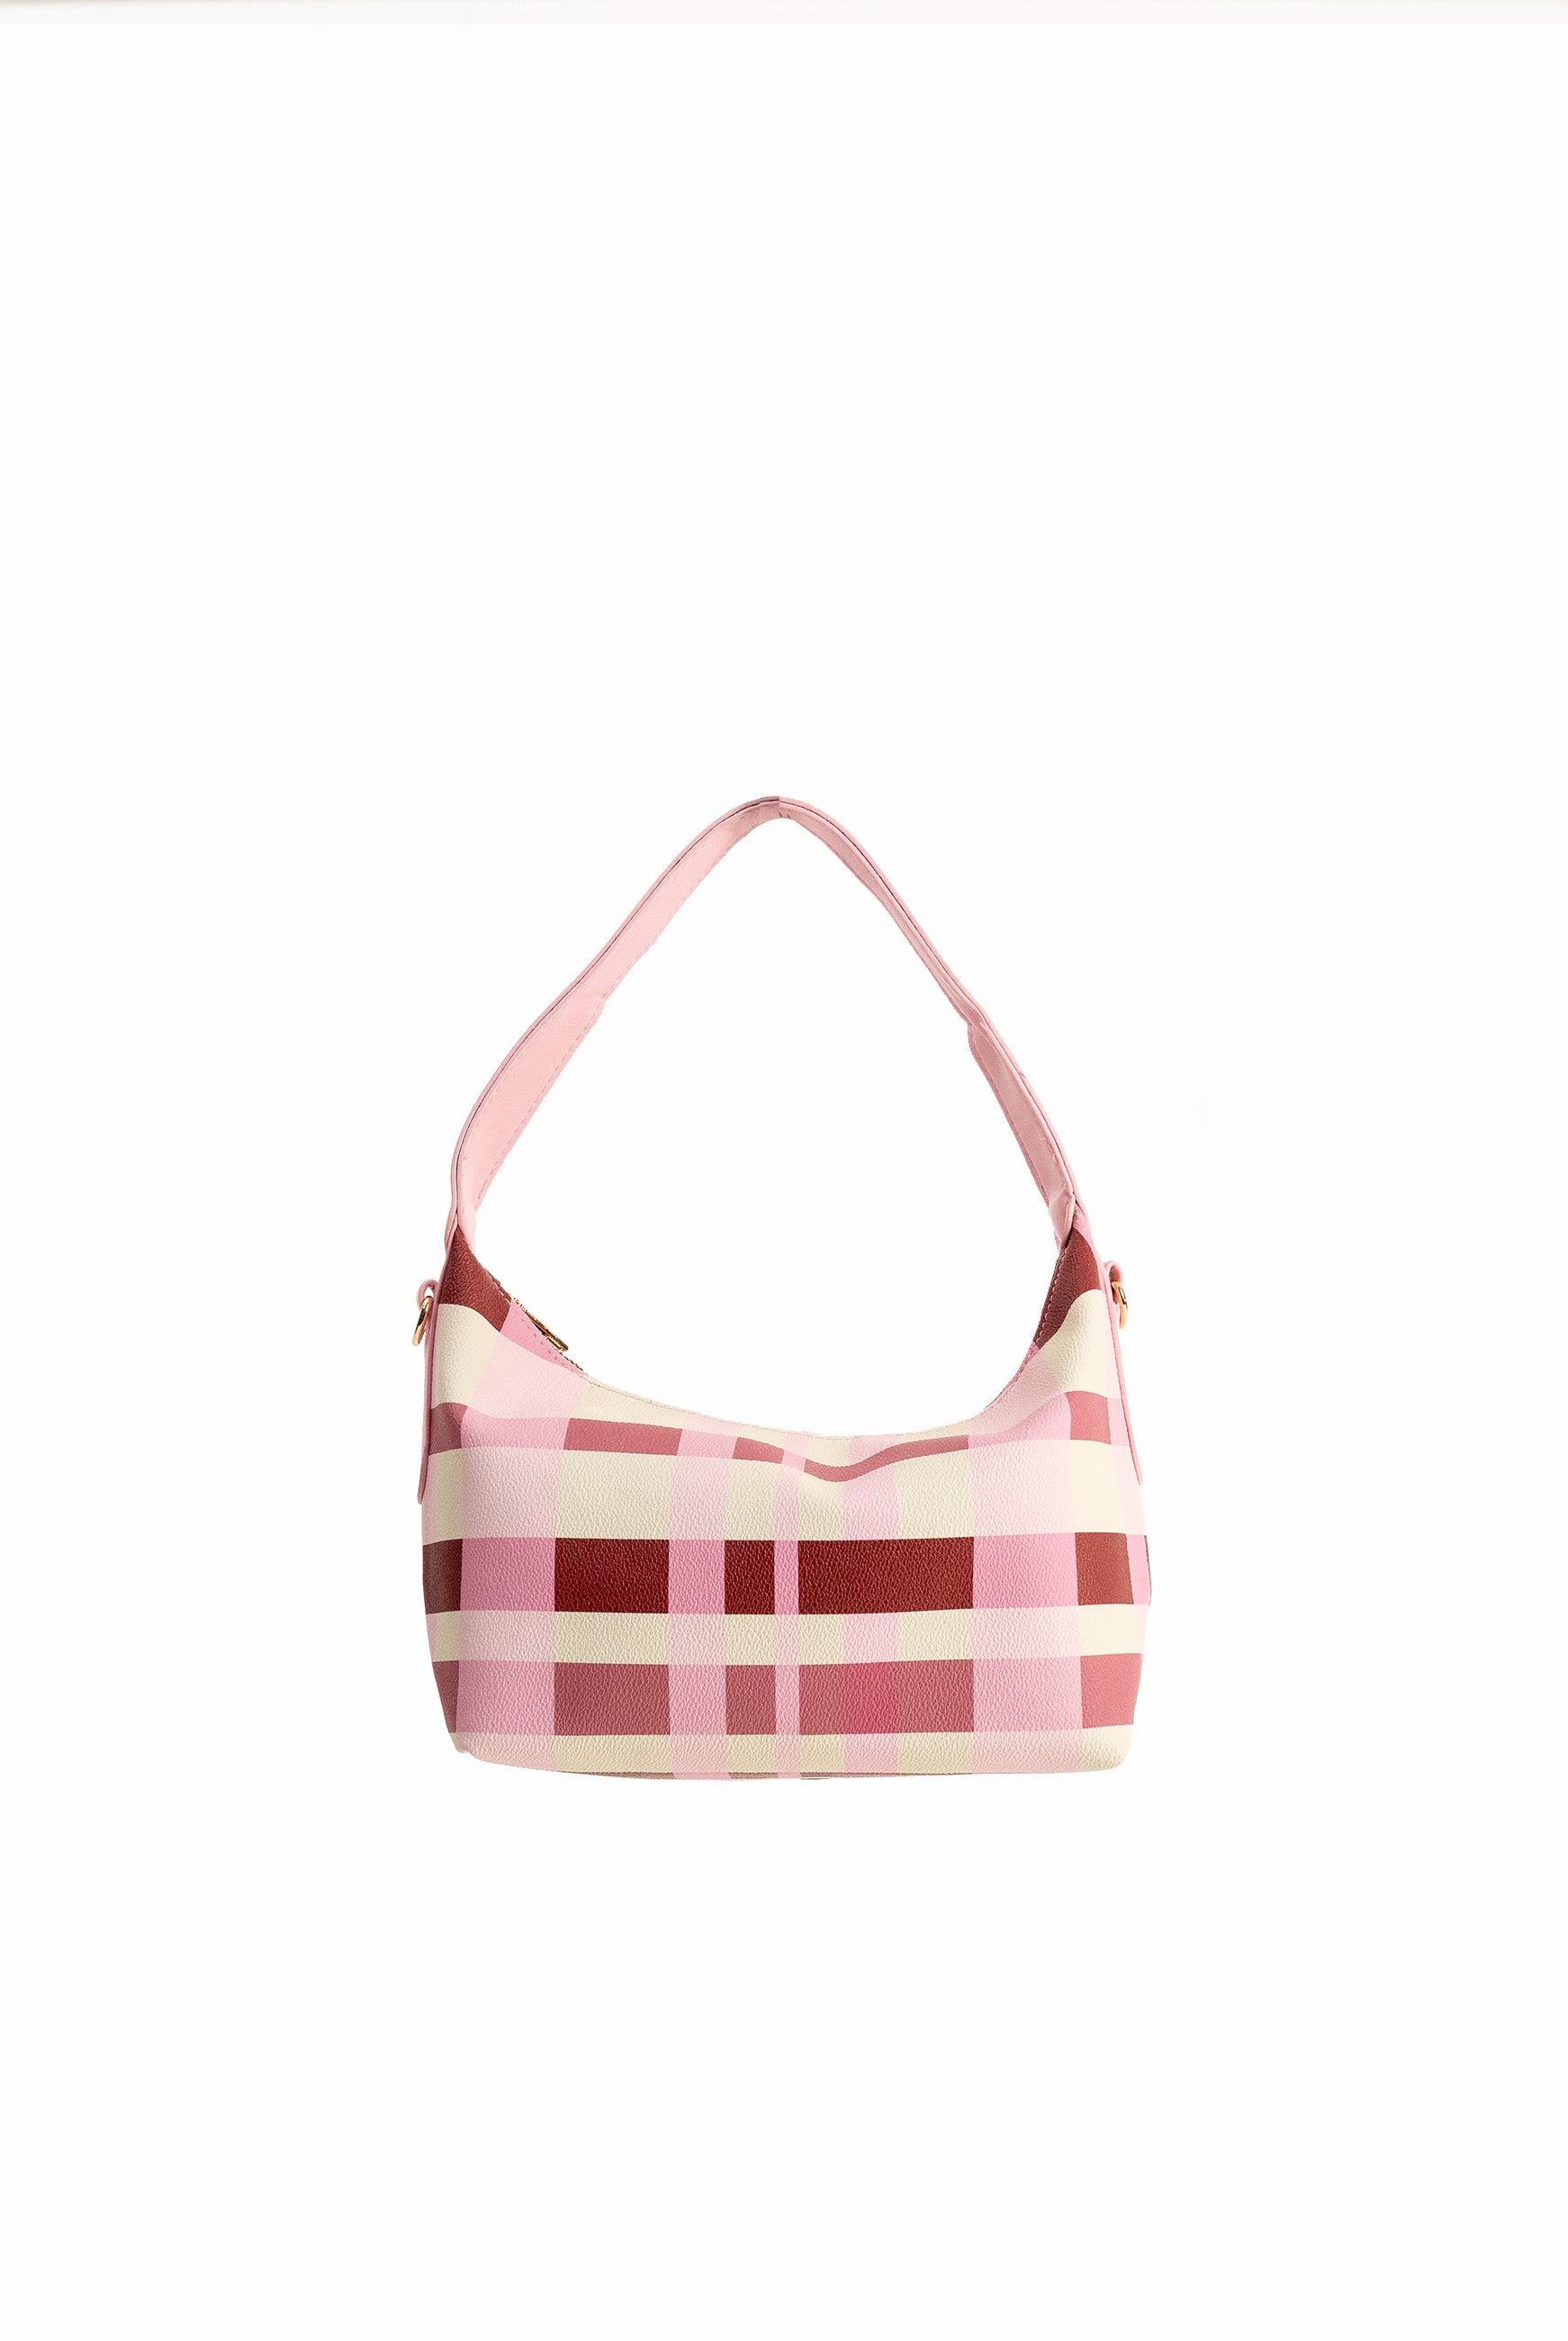 My Accessories London Hobo Check Shoulder Bag in Pink | Womens Accessories | Party Season